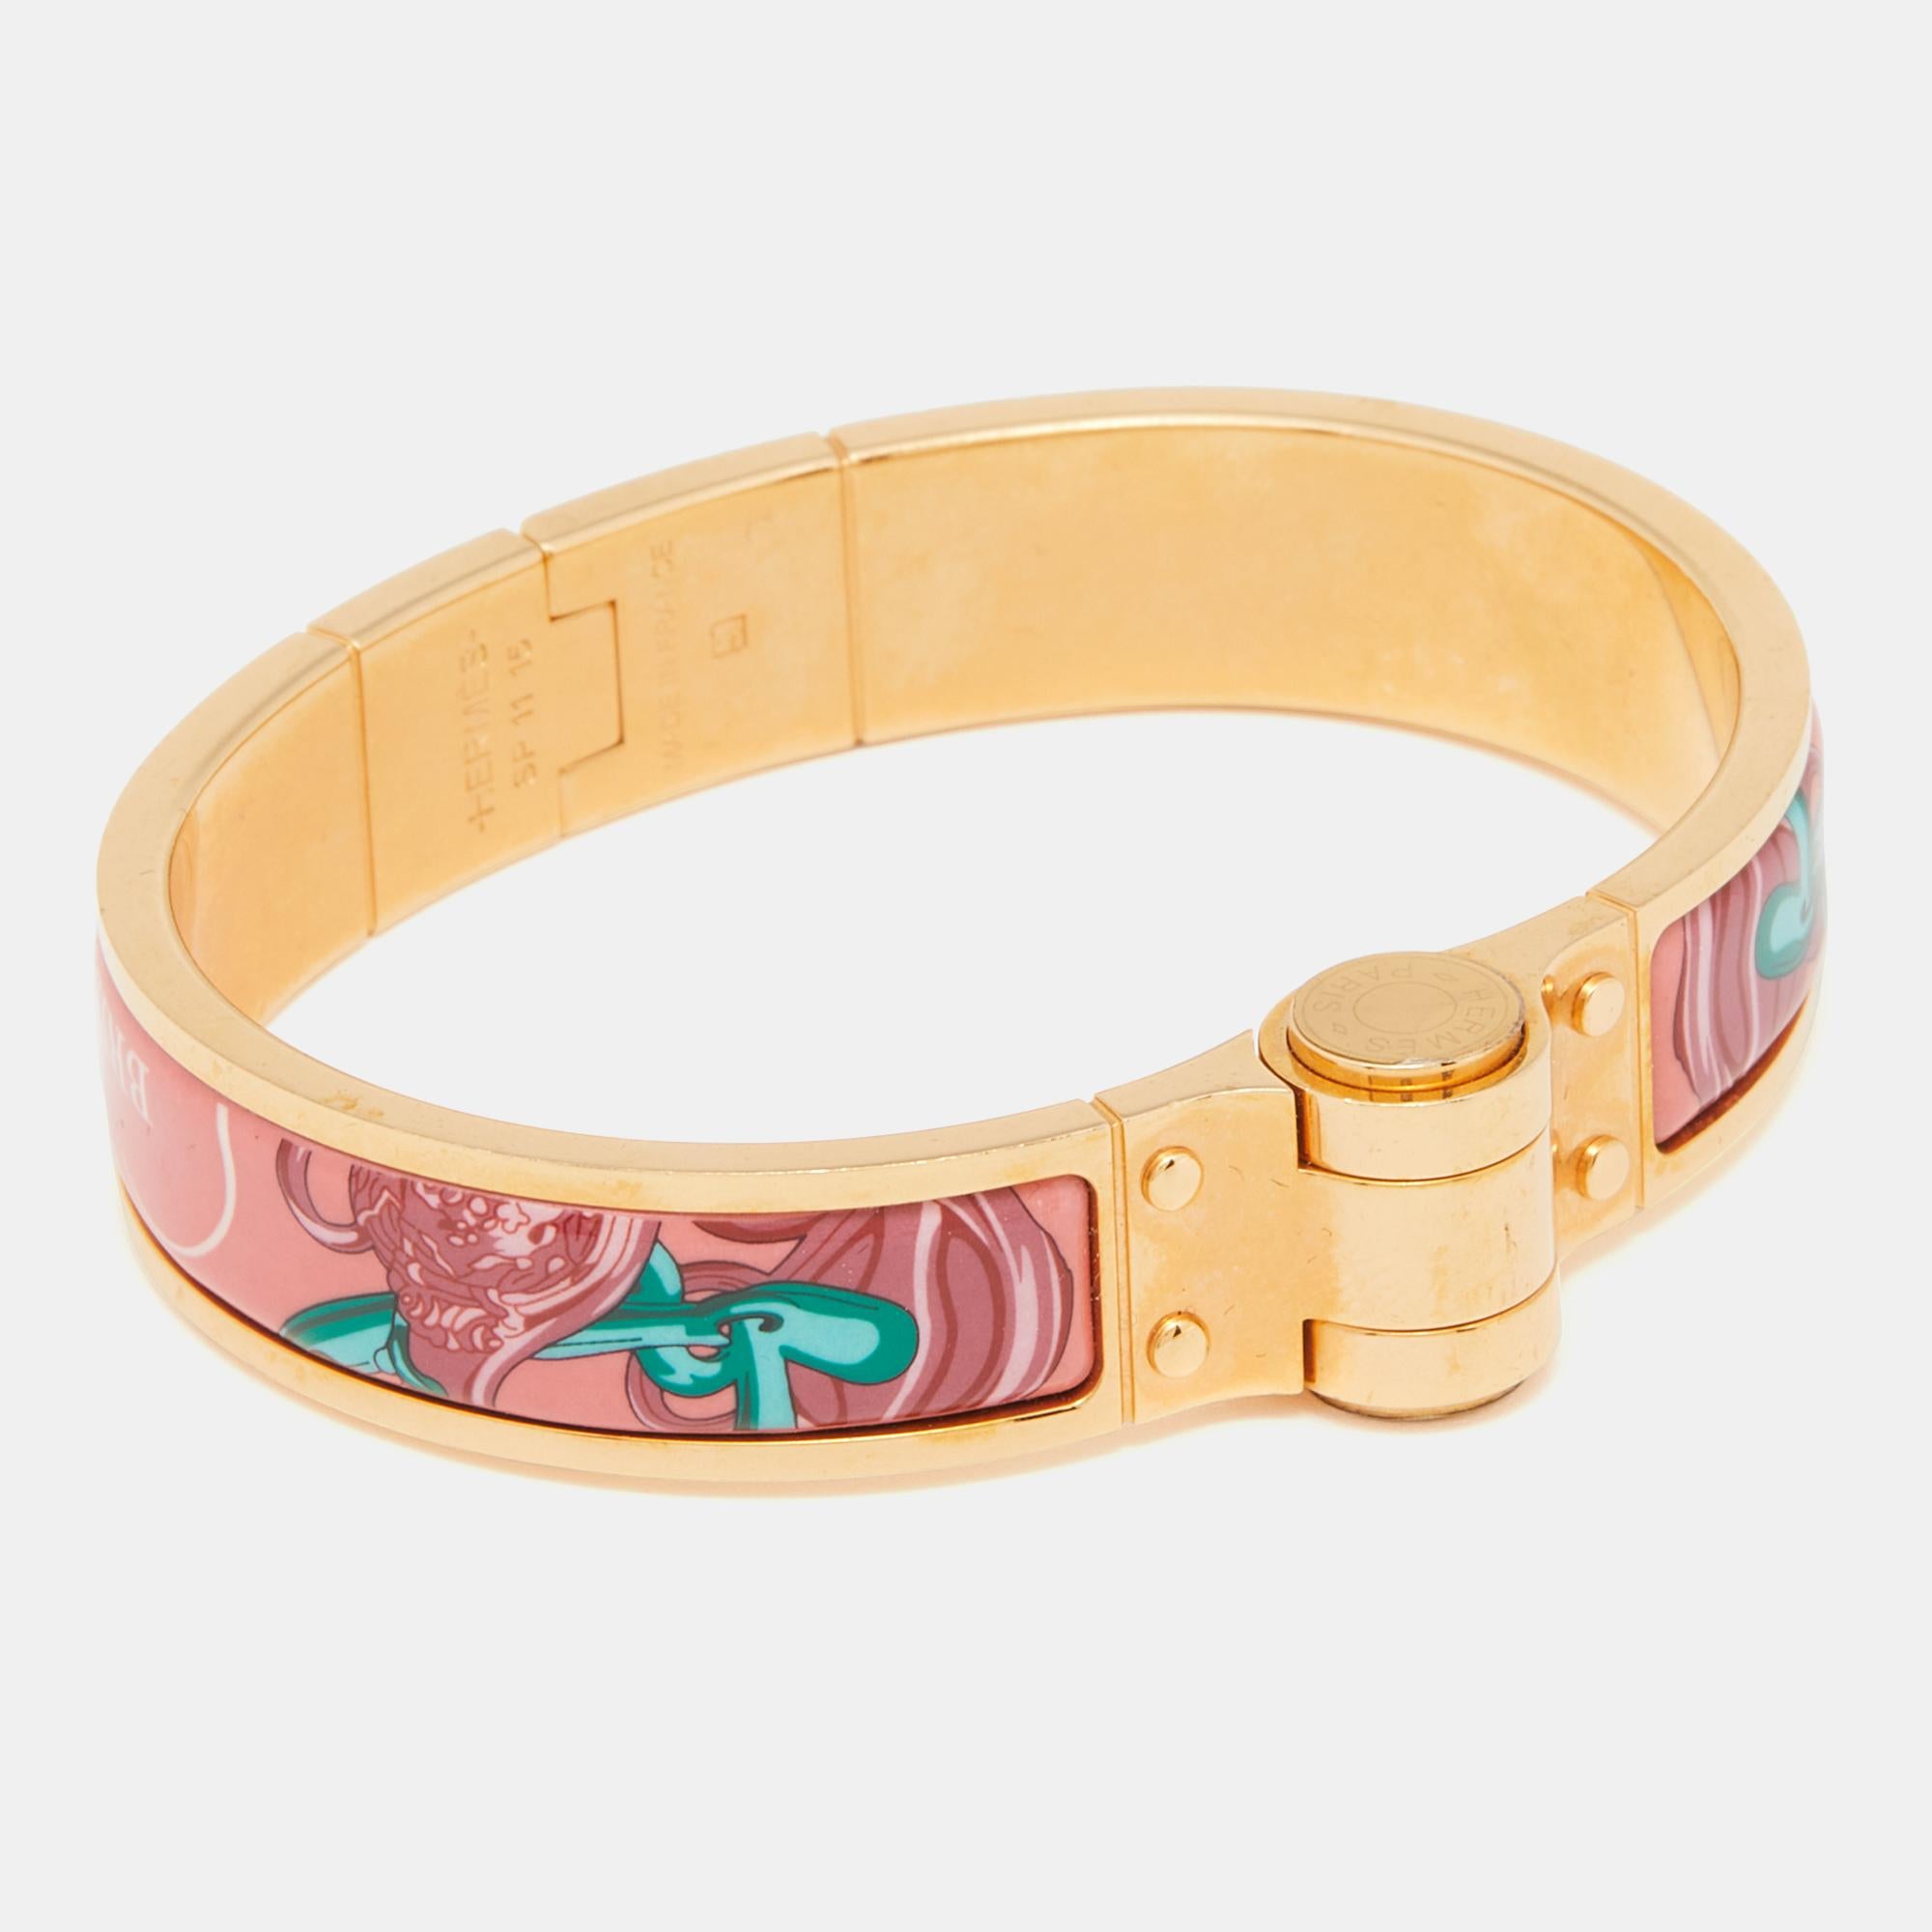 A classic Hermes bracelet is so simple, effortless, and yet so chic and luxurious that it is worn over and over again once purchased. It never goes out of style. Constructed using gold-plated metal, this piece is beautified with enamel.

